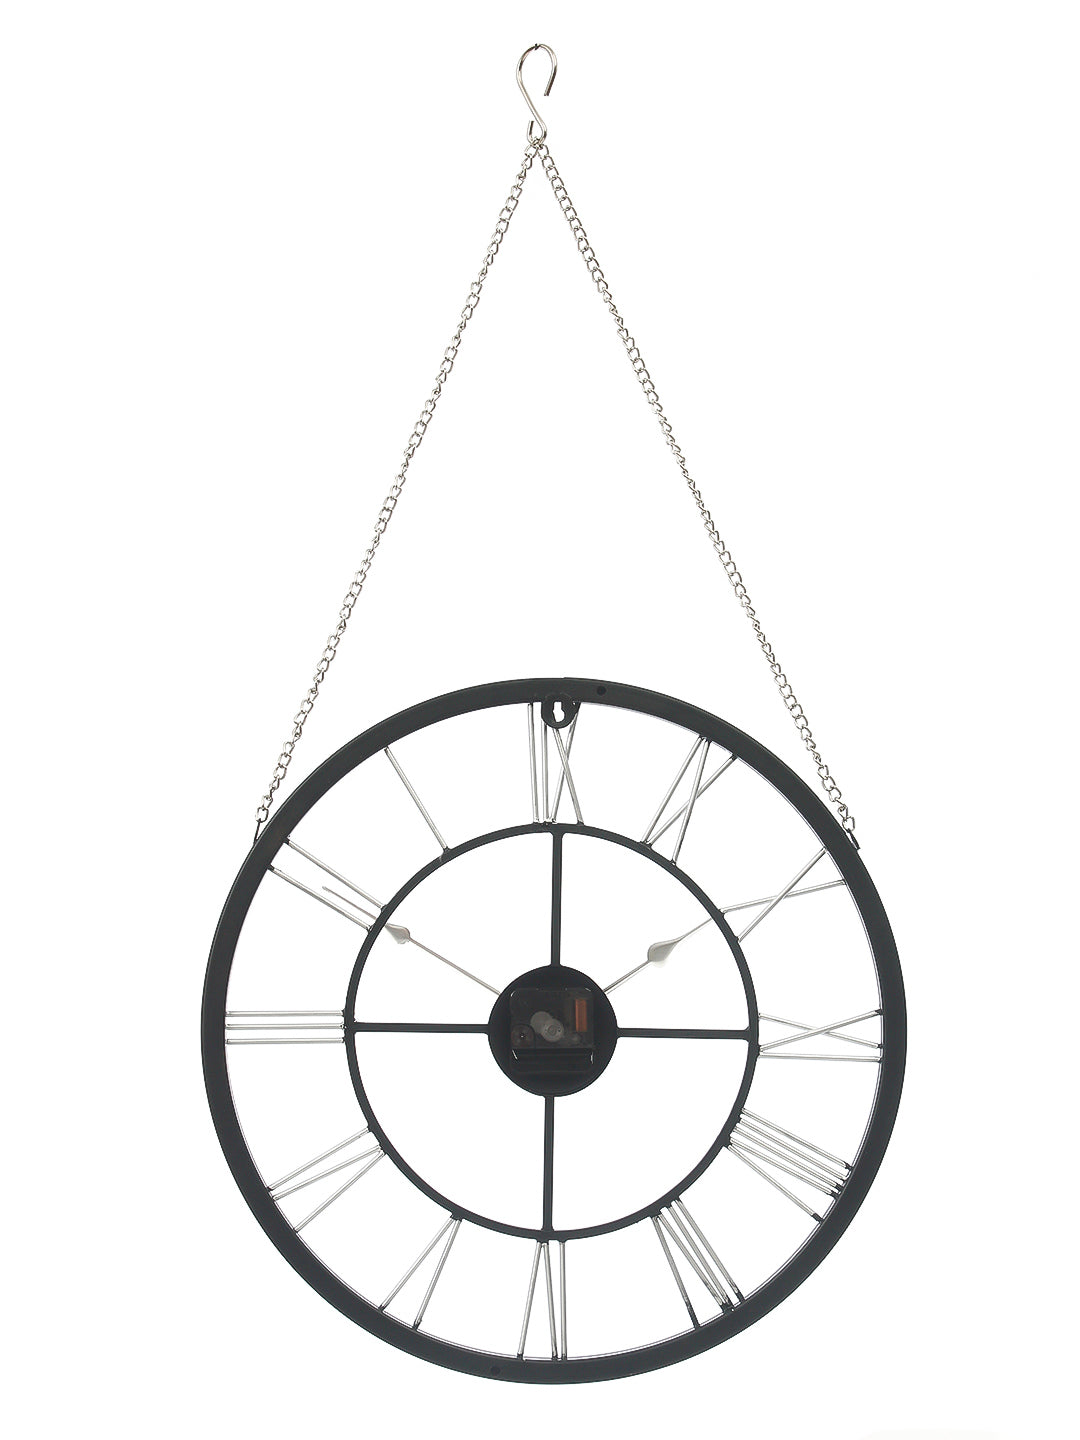 Round Black Iron Roman Numeral Handcrafted Analog Wall Clock With Hanging Chain 6